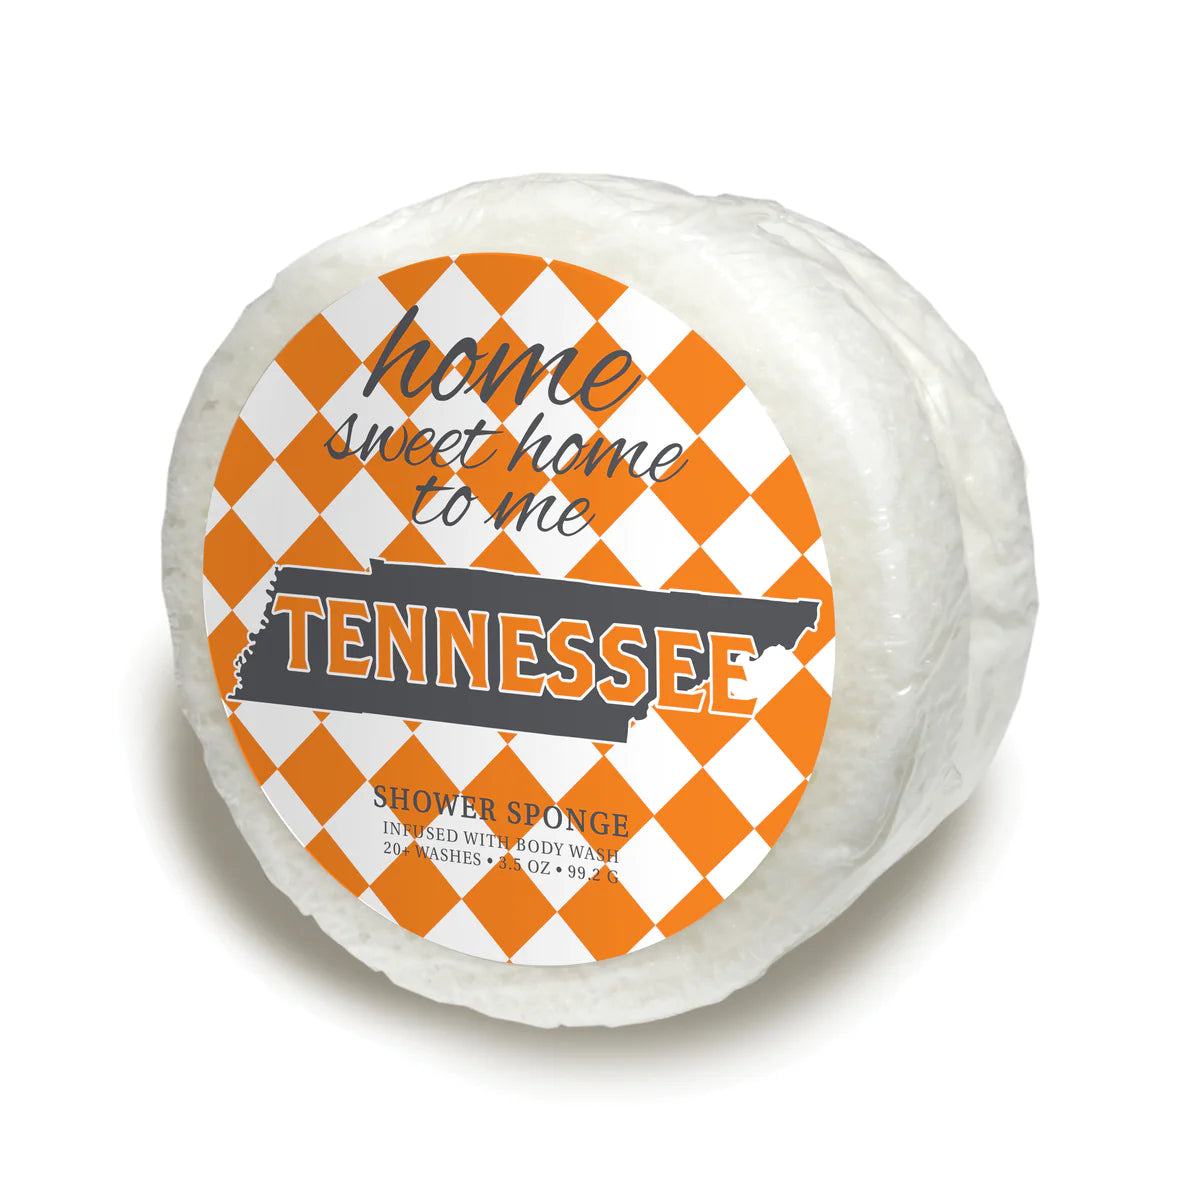 Caren "Home Sweet Home To Me Tennessee" Soap sponge. White and round.